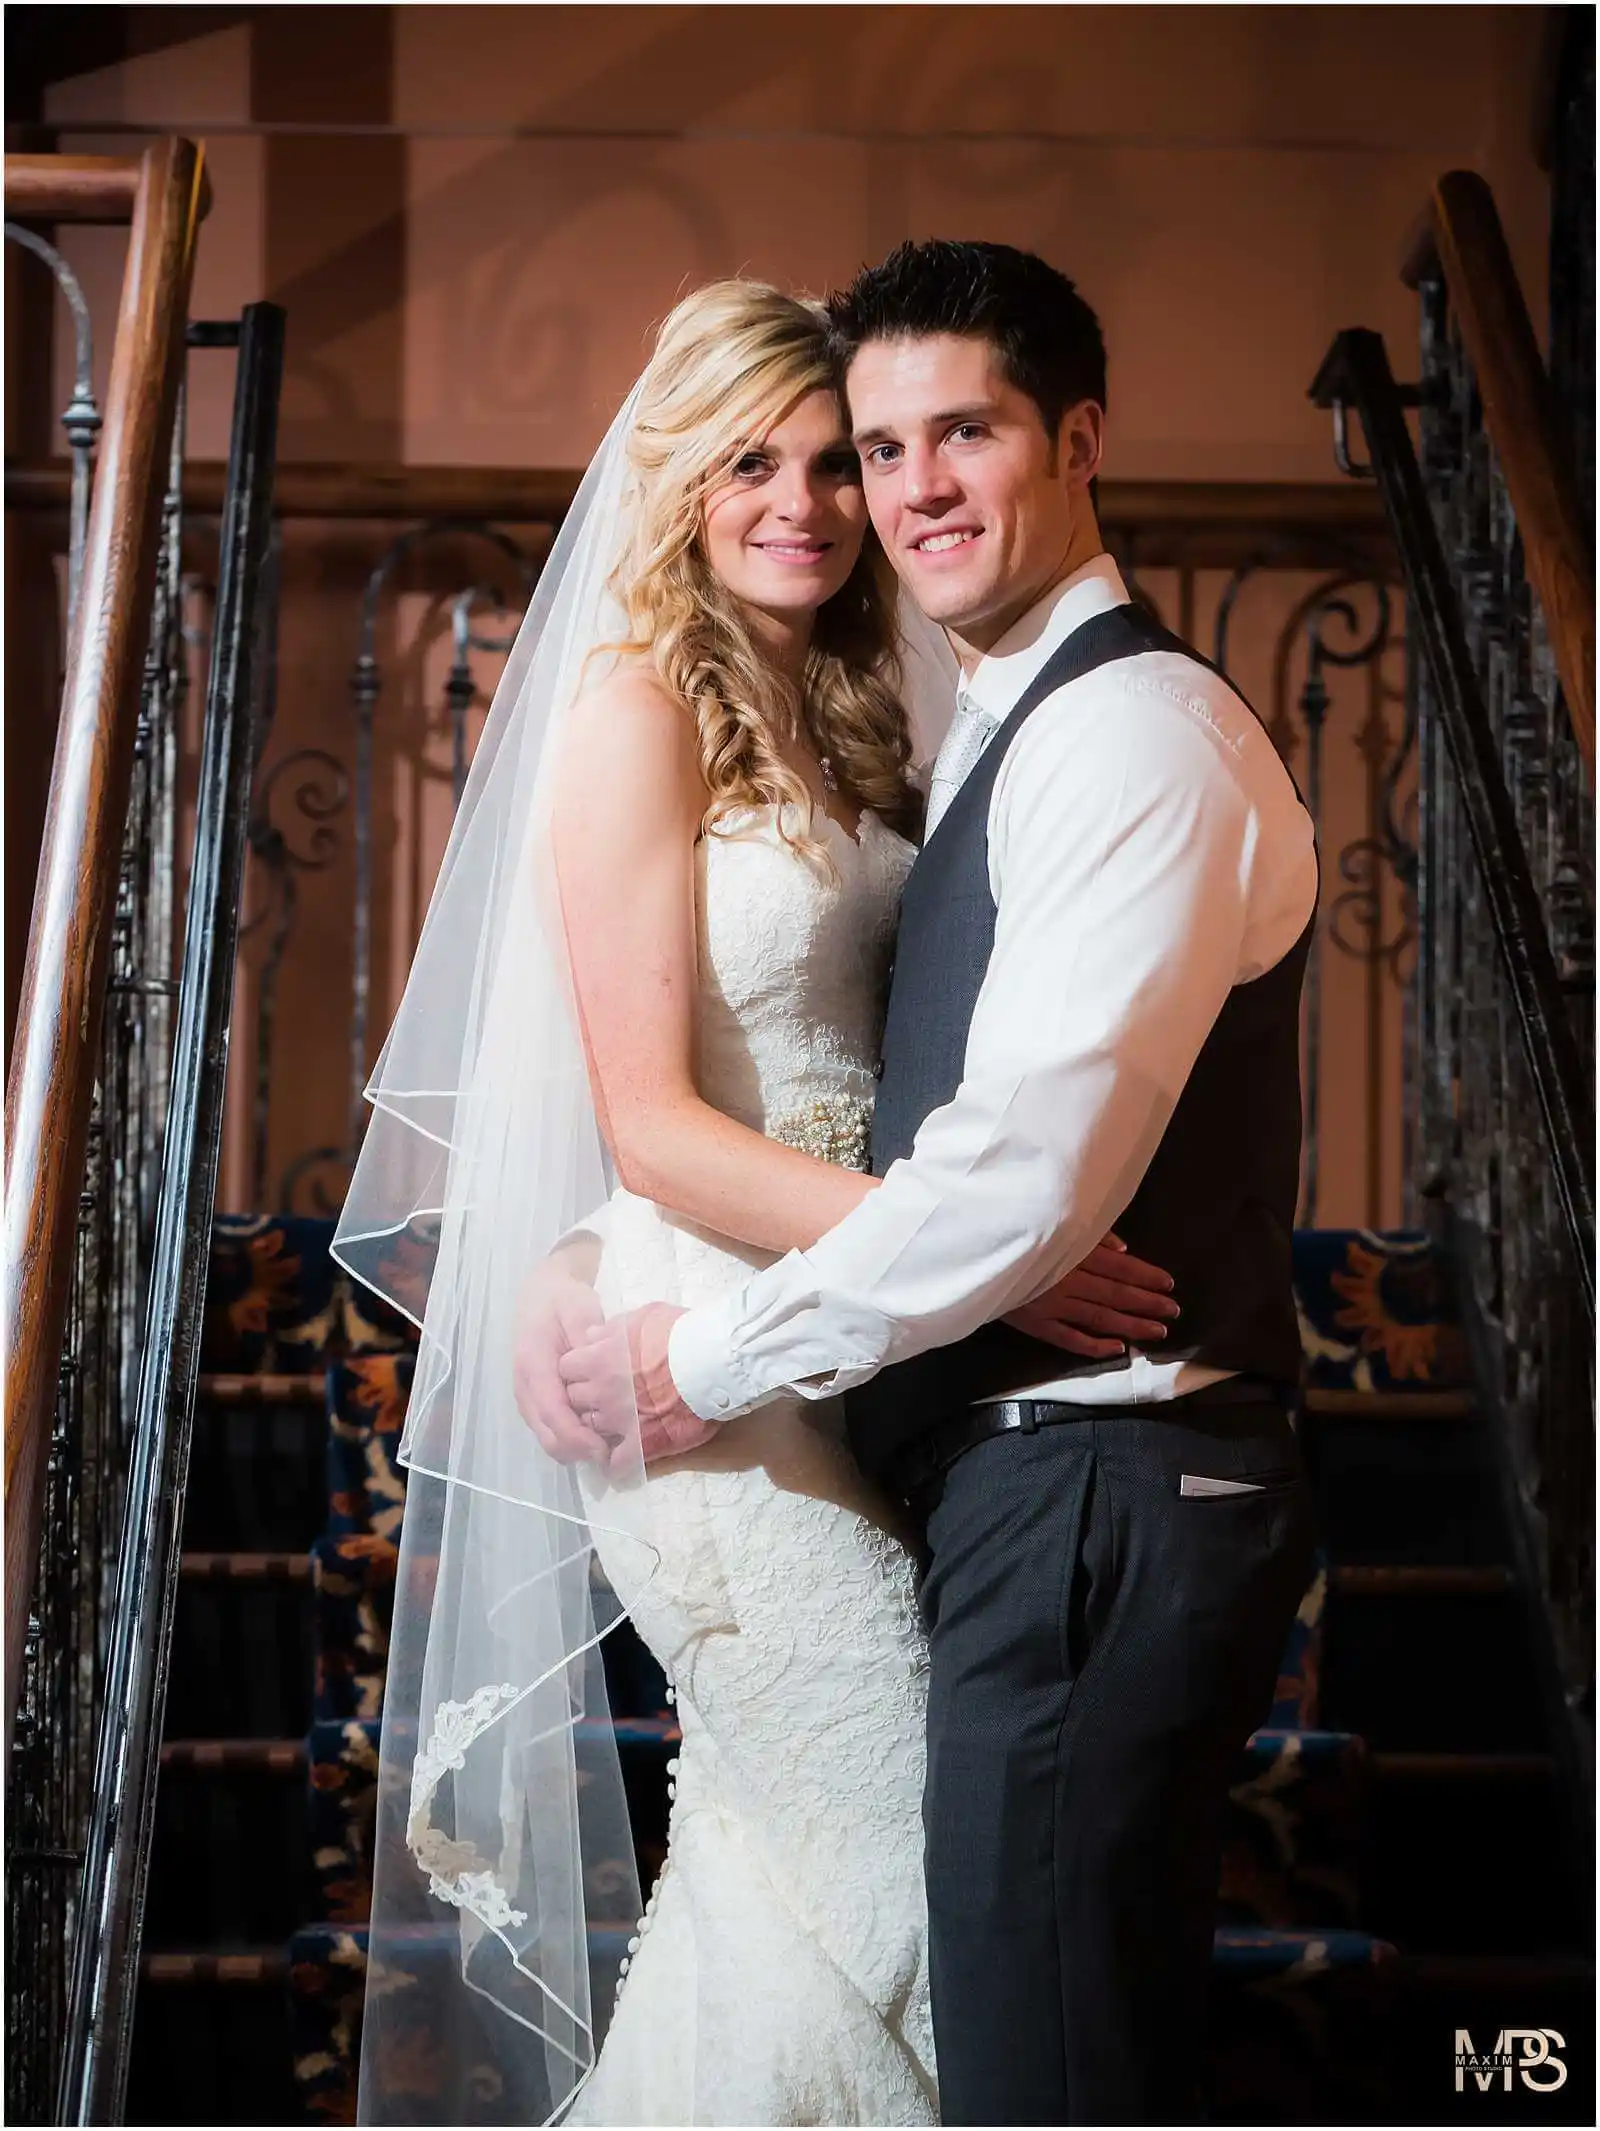 Newlyweds embracing on grand staircase in wedding attire.